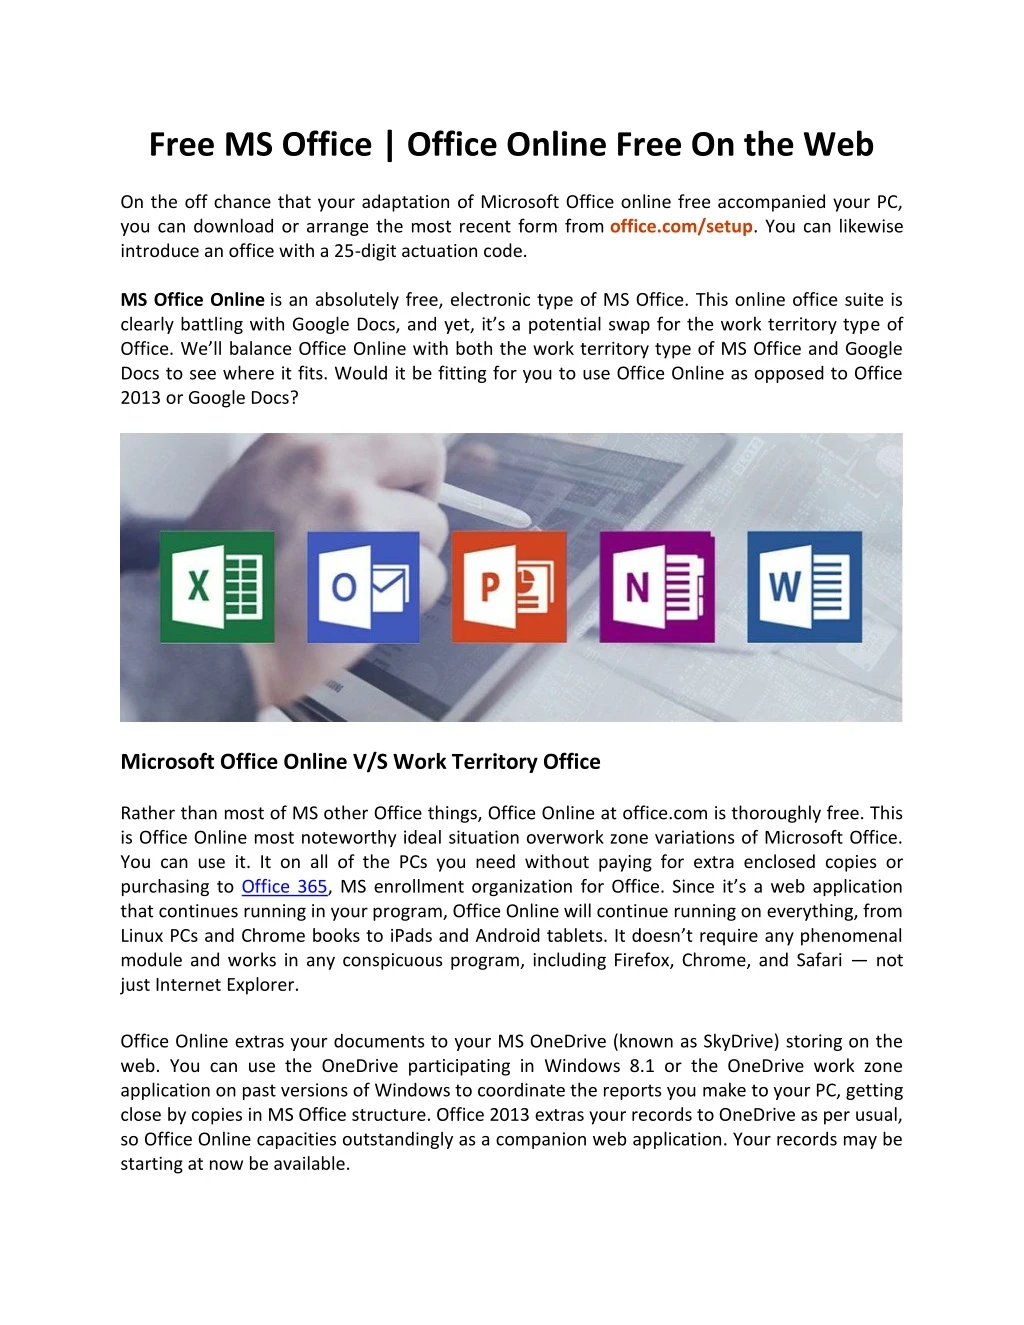 free ms office office online free on the web